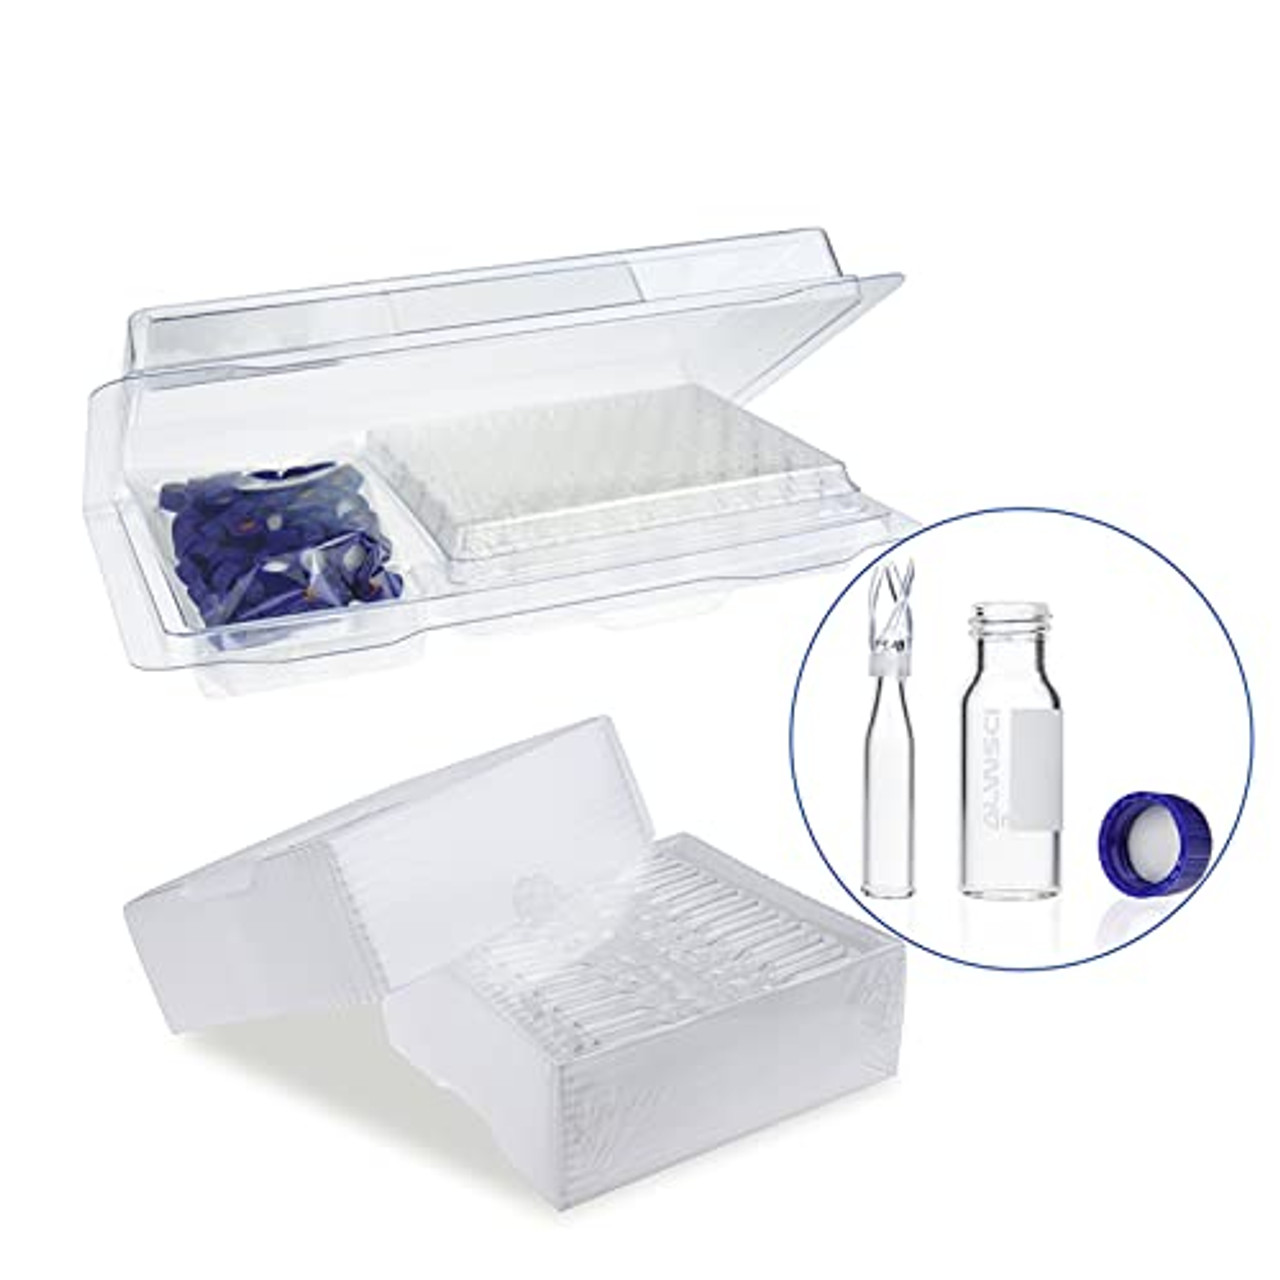 2ml Clear Plastic Vial with 300µL Insert Volume (Fixed Insert),HPLC  Autosampler Vials, 100/PK